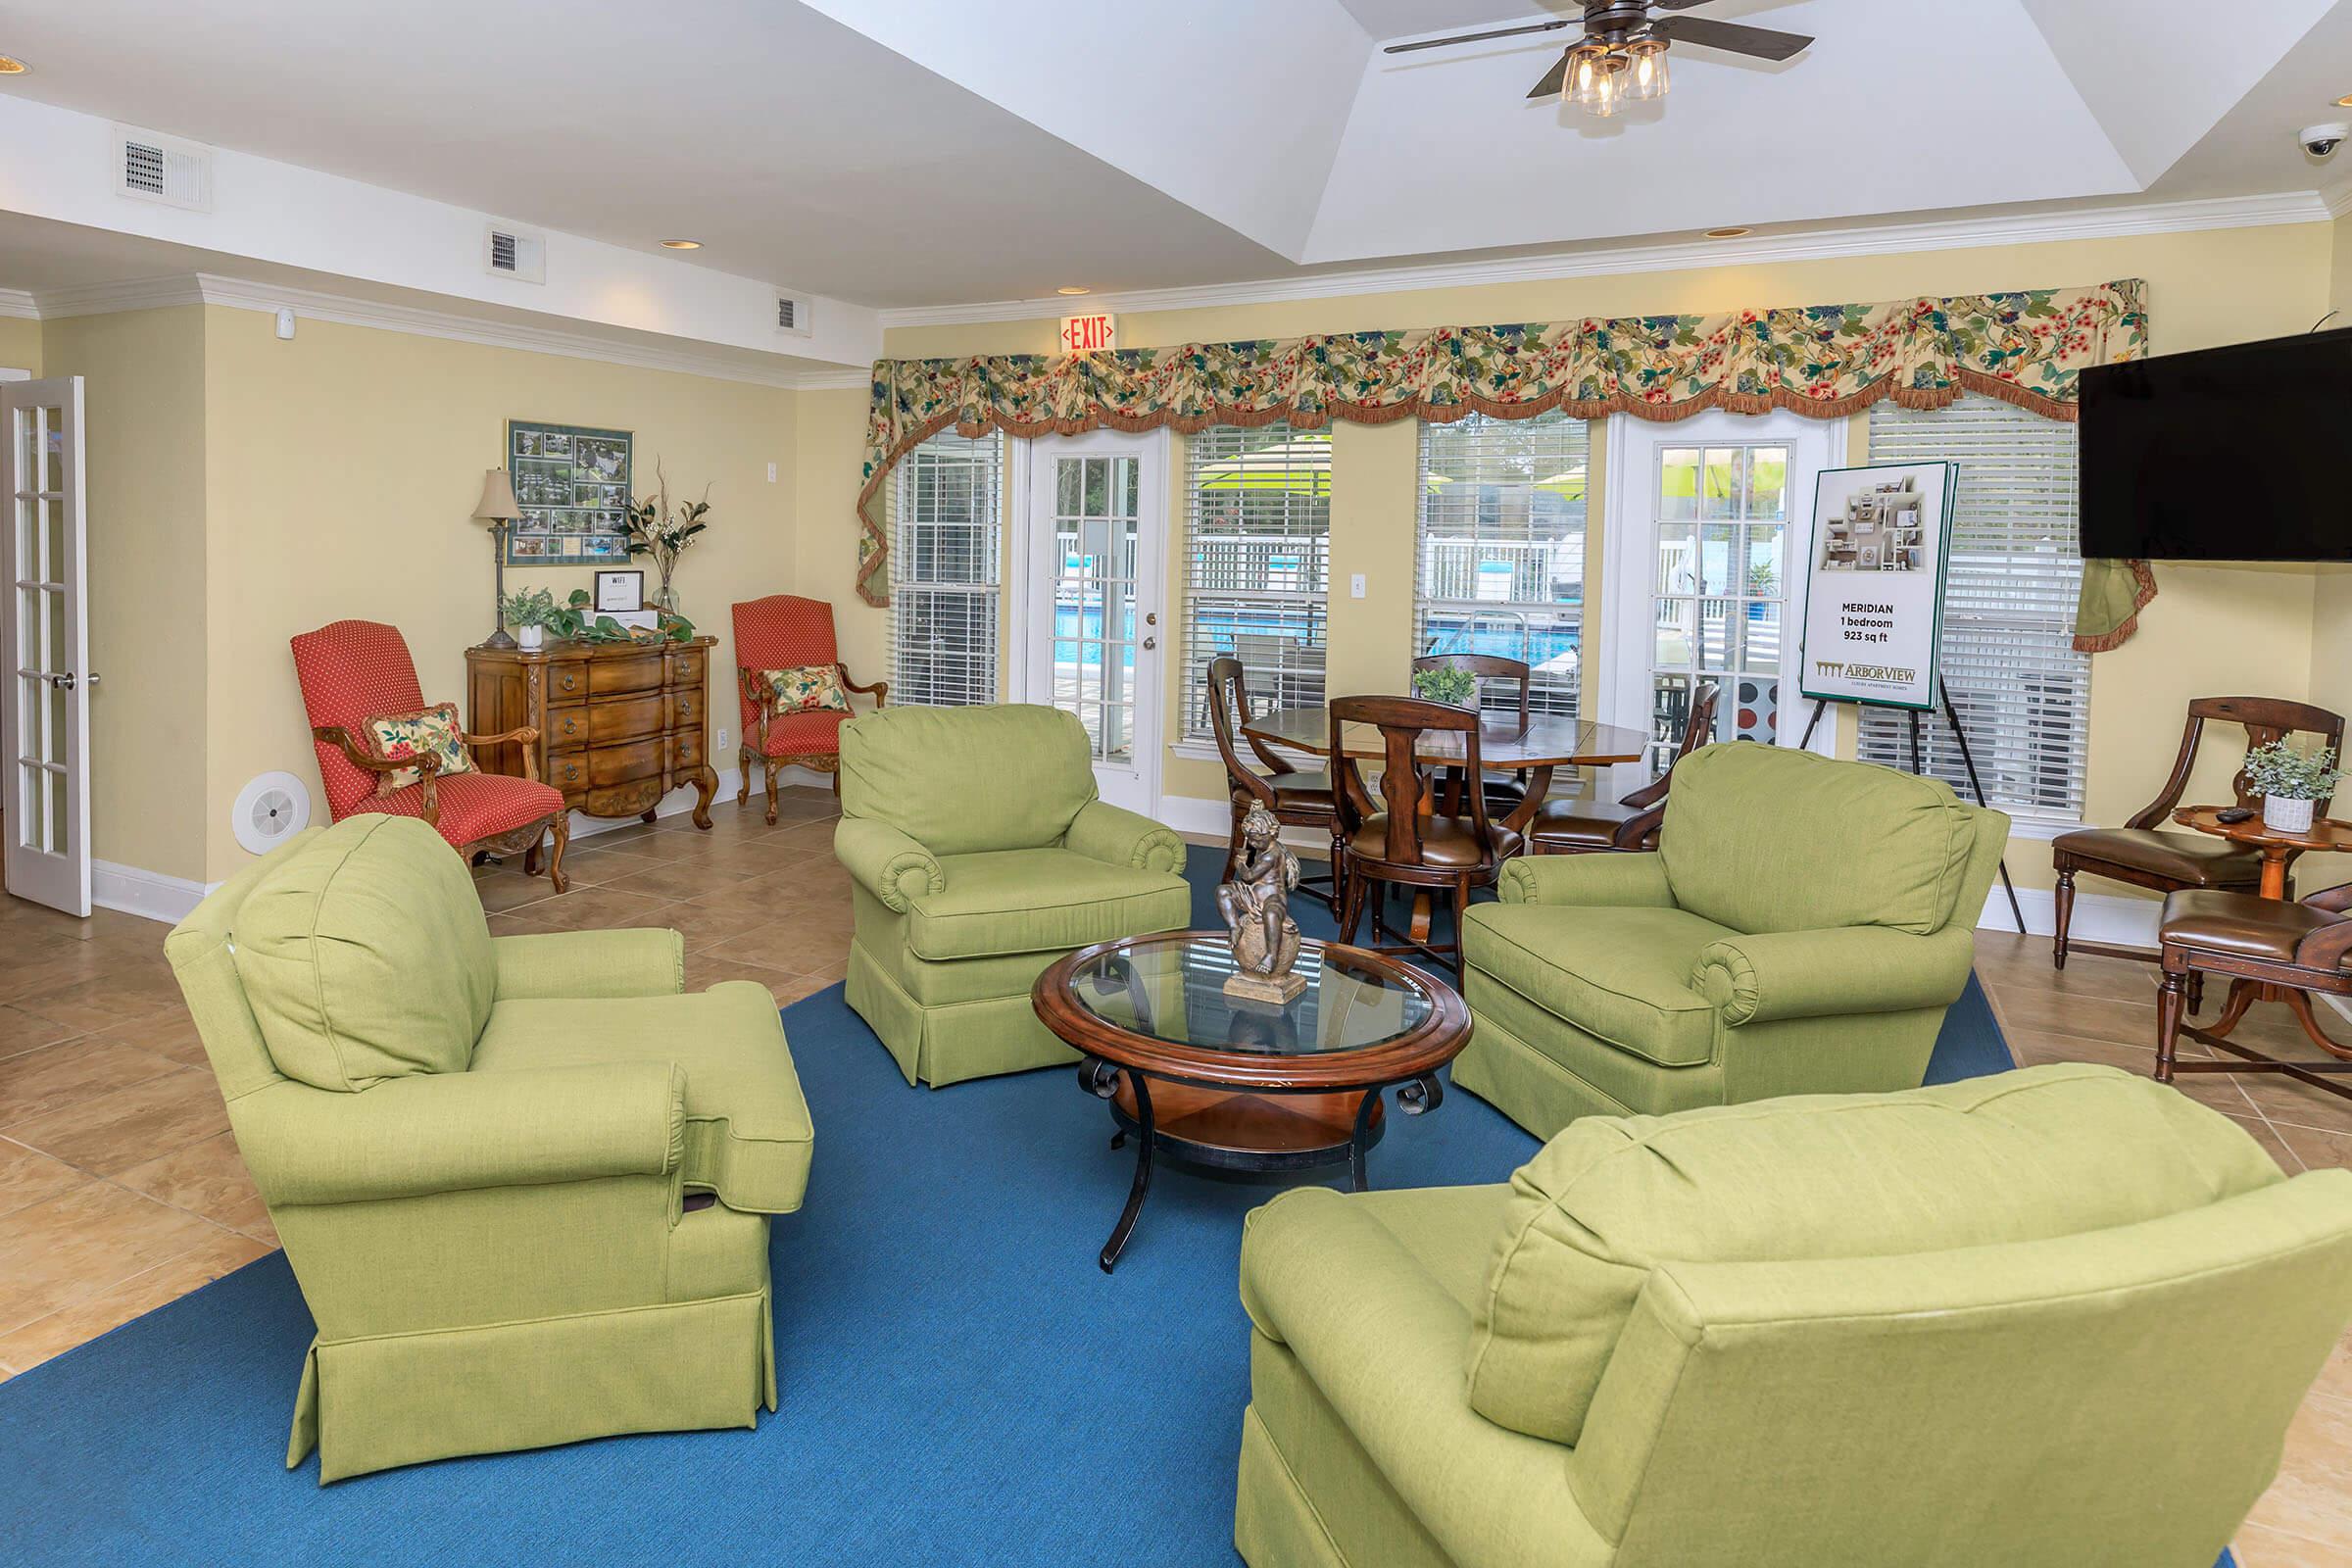 HAVE A SEAT IN THE CHARMING ARBOR VIEW CLUBHOUSE